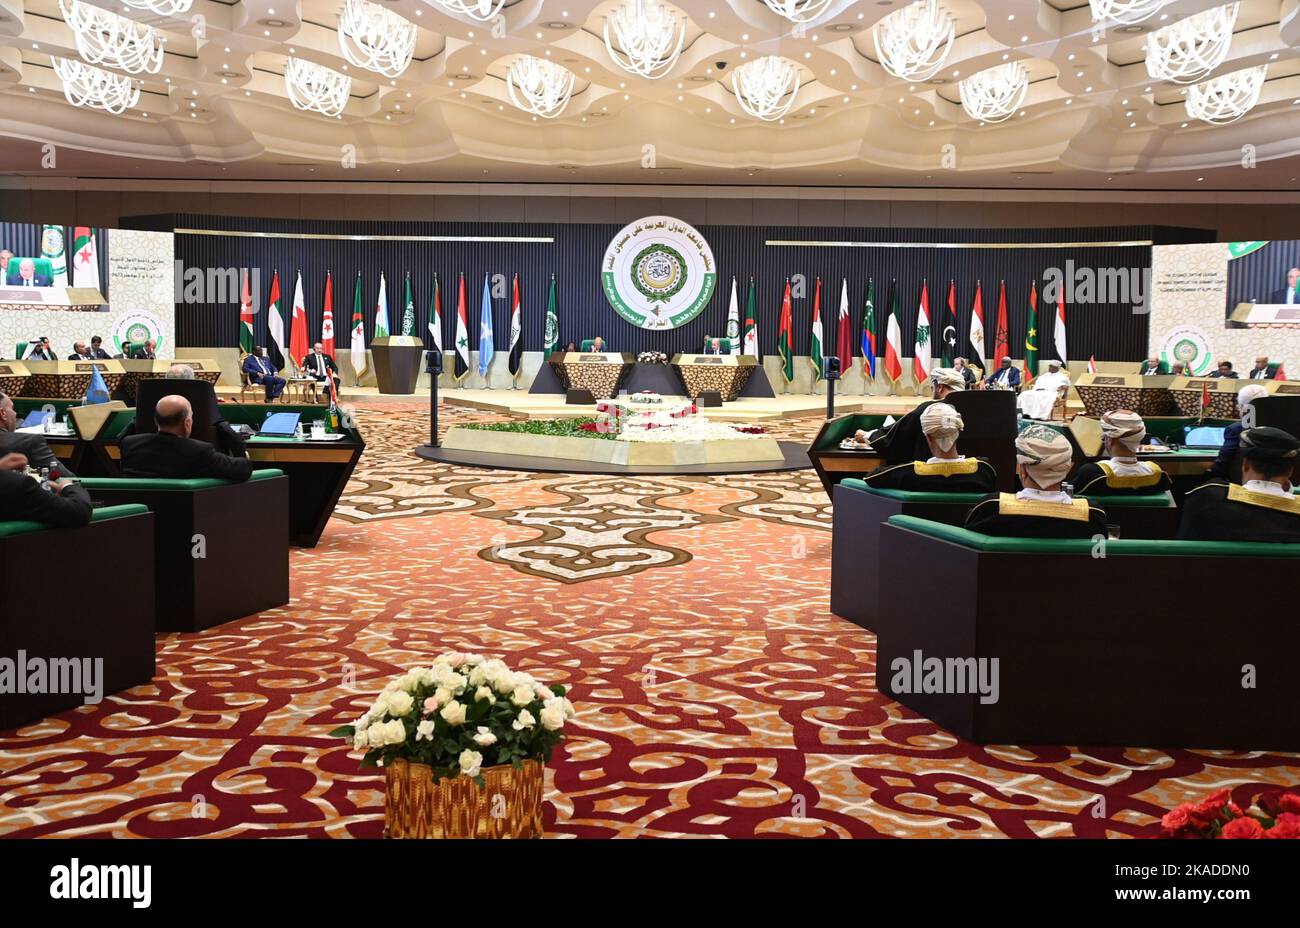 (221102) -- ALGIERS, Nov. 2, 2022 (Xinhua) -- This photo taken on Nov. 1, 2022 shows a scene of the 31st session of the Arab League Summit in Algiers, Algeria. The summit kicked off on Tuesday evening in the Algerian capital of Algiers with regional food security and Palestinian issue being on top of agenda. (Algerian Presidency/Handout via Xinhua) Stock Photo